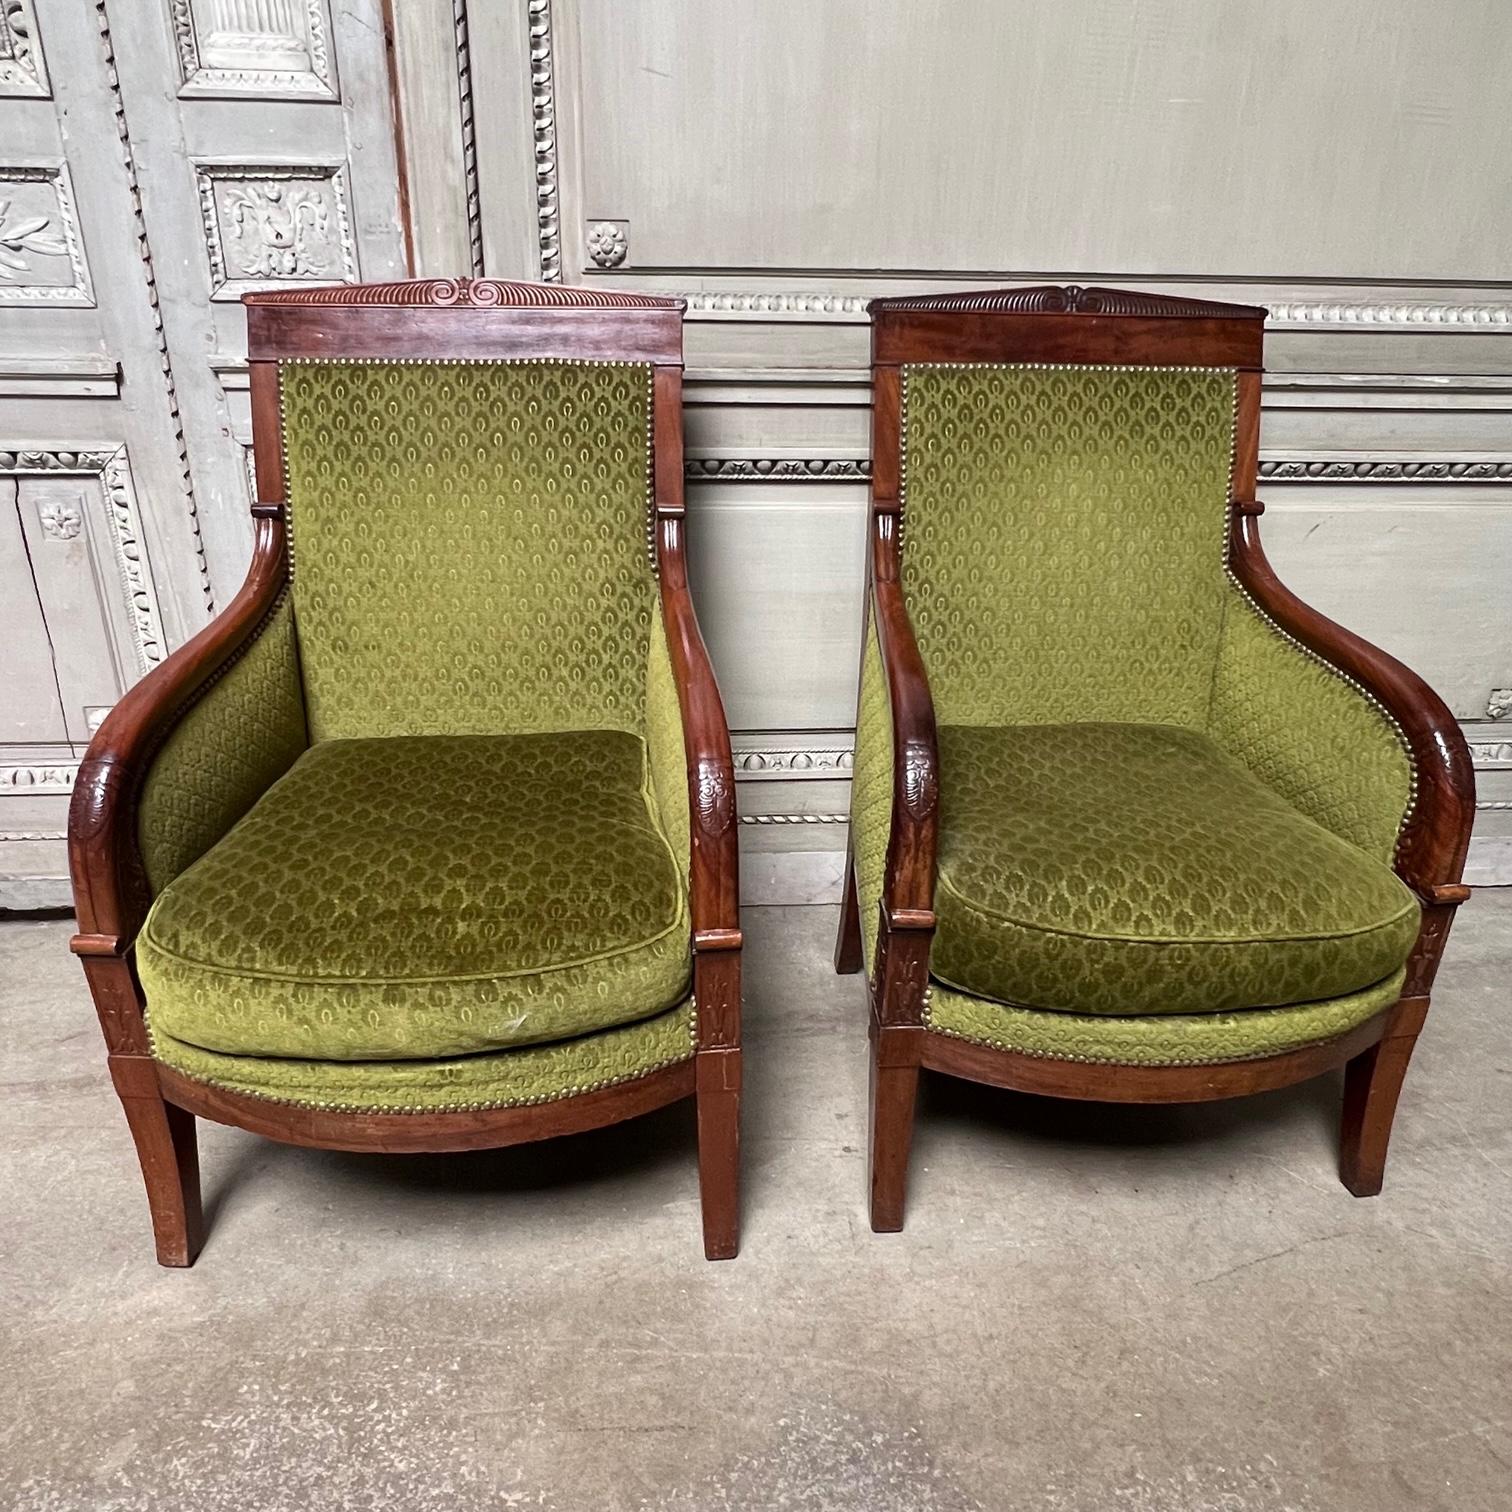 This pair of French carved mahogany Charles X beregeres, armchairs are larger than most from this period and are nicely carved and elegant with a late neoclassical style. These armchairs date from the early 19th century and appear to be solid